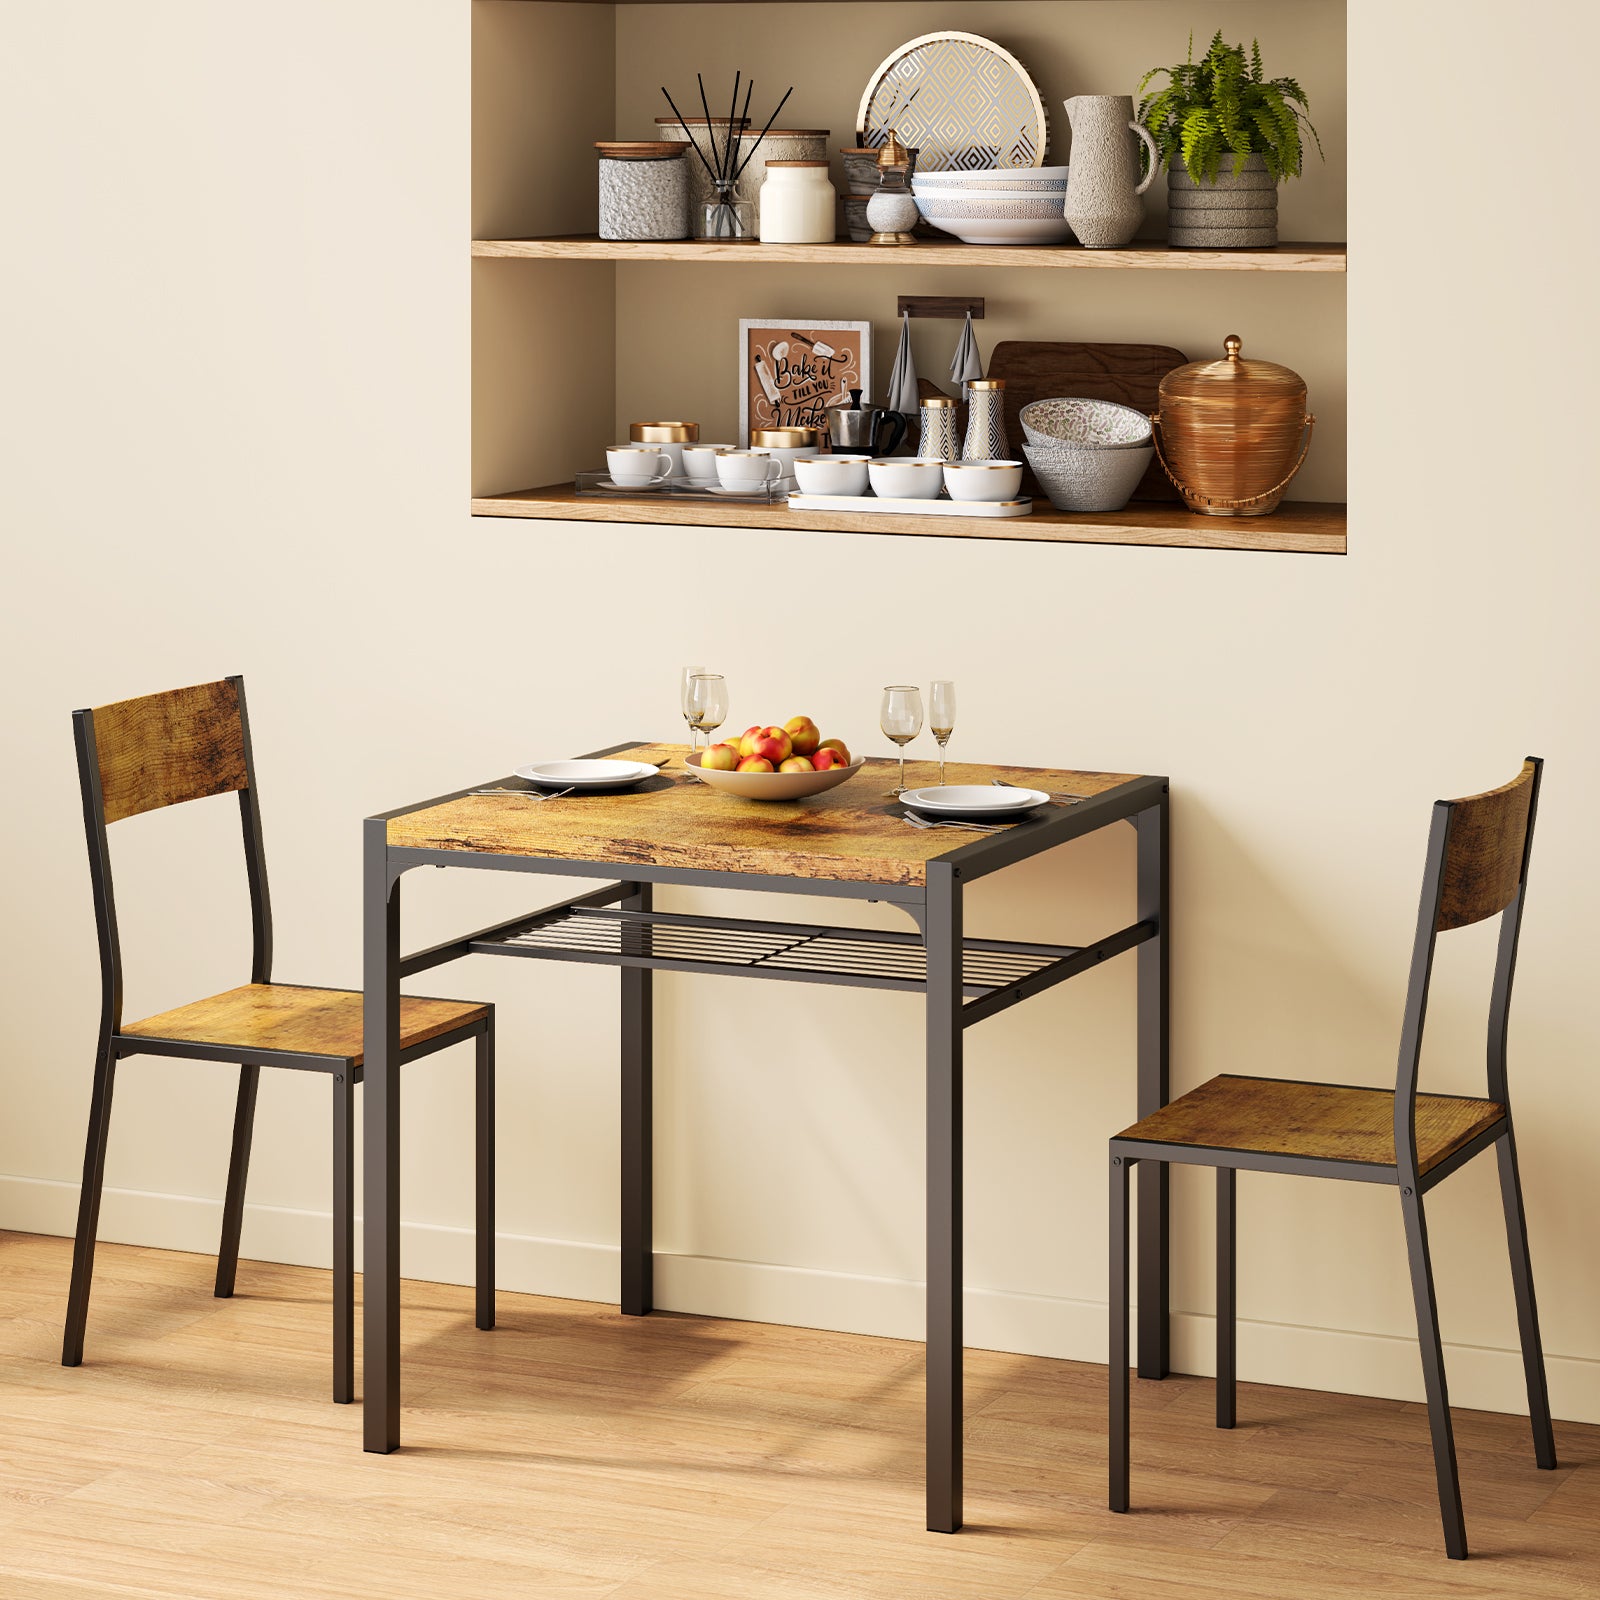 Gizoon TB44 Dining Table Set for 4 with Bench & 2 Chairs